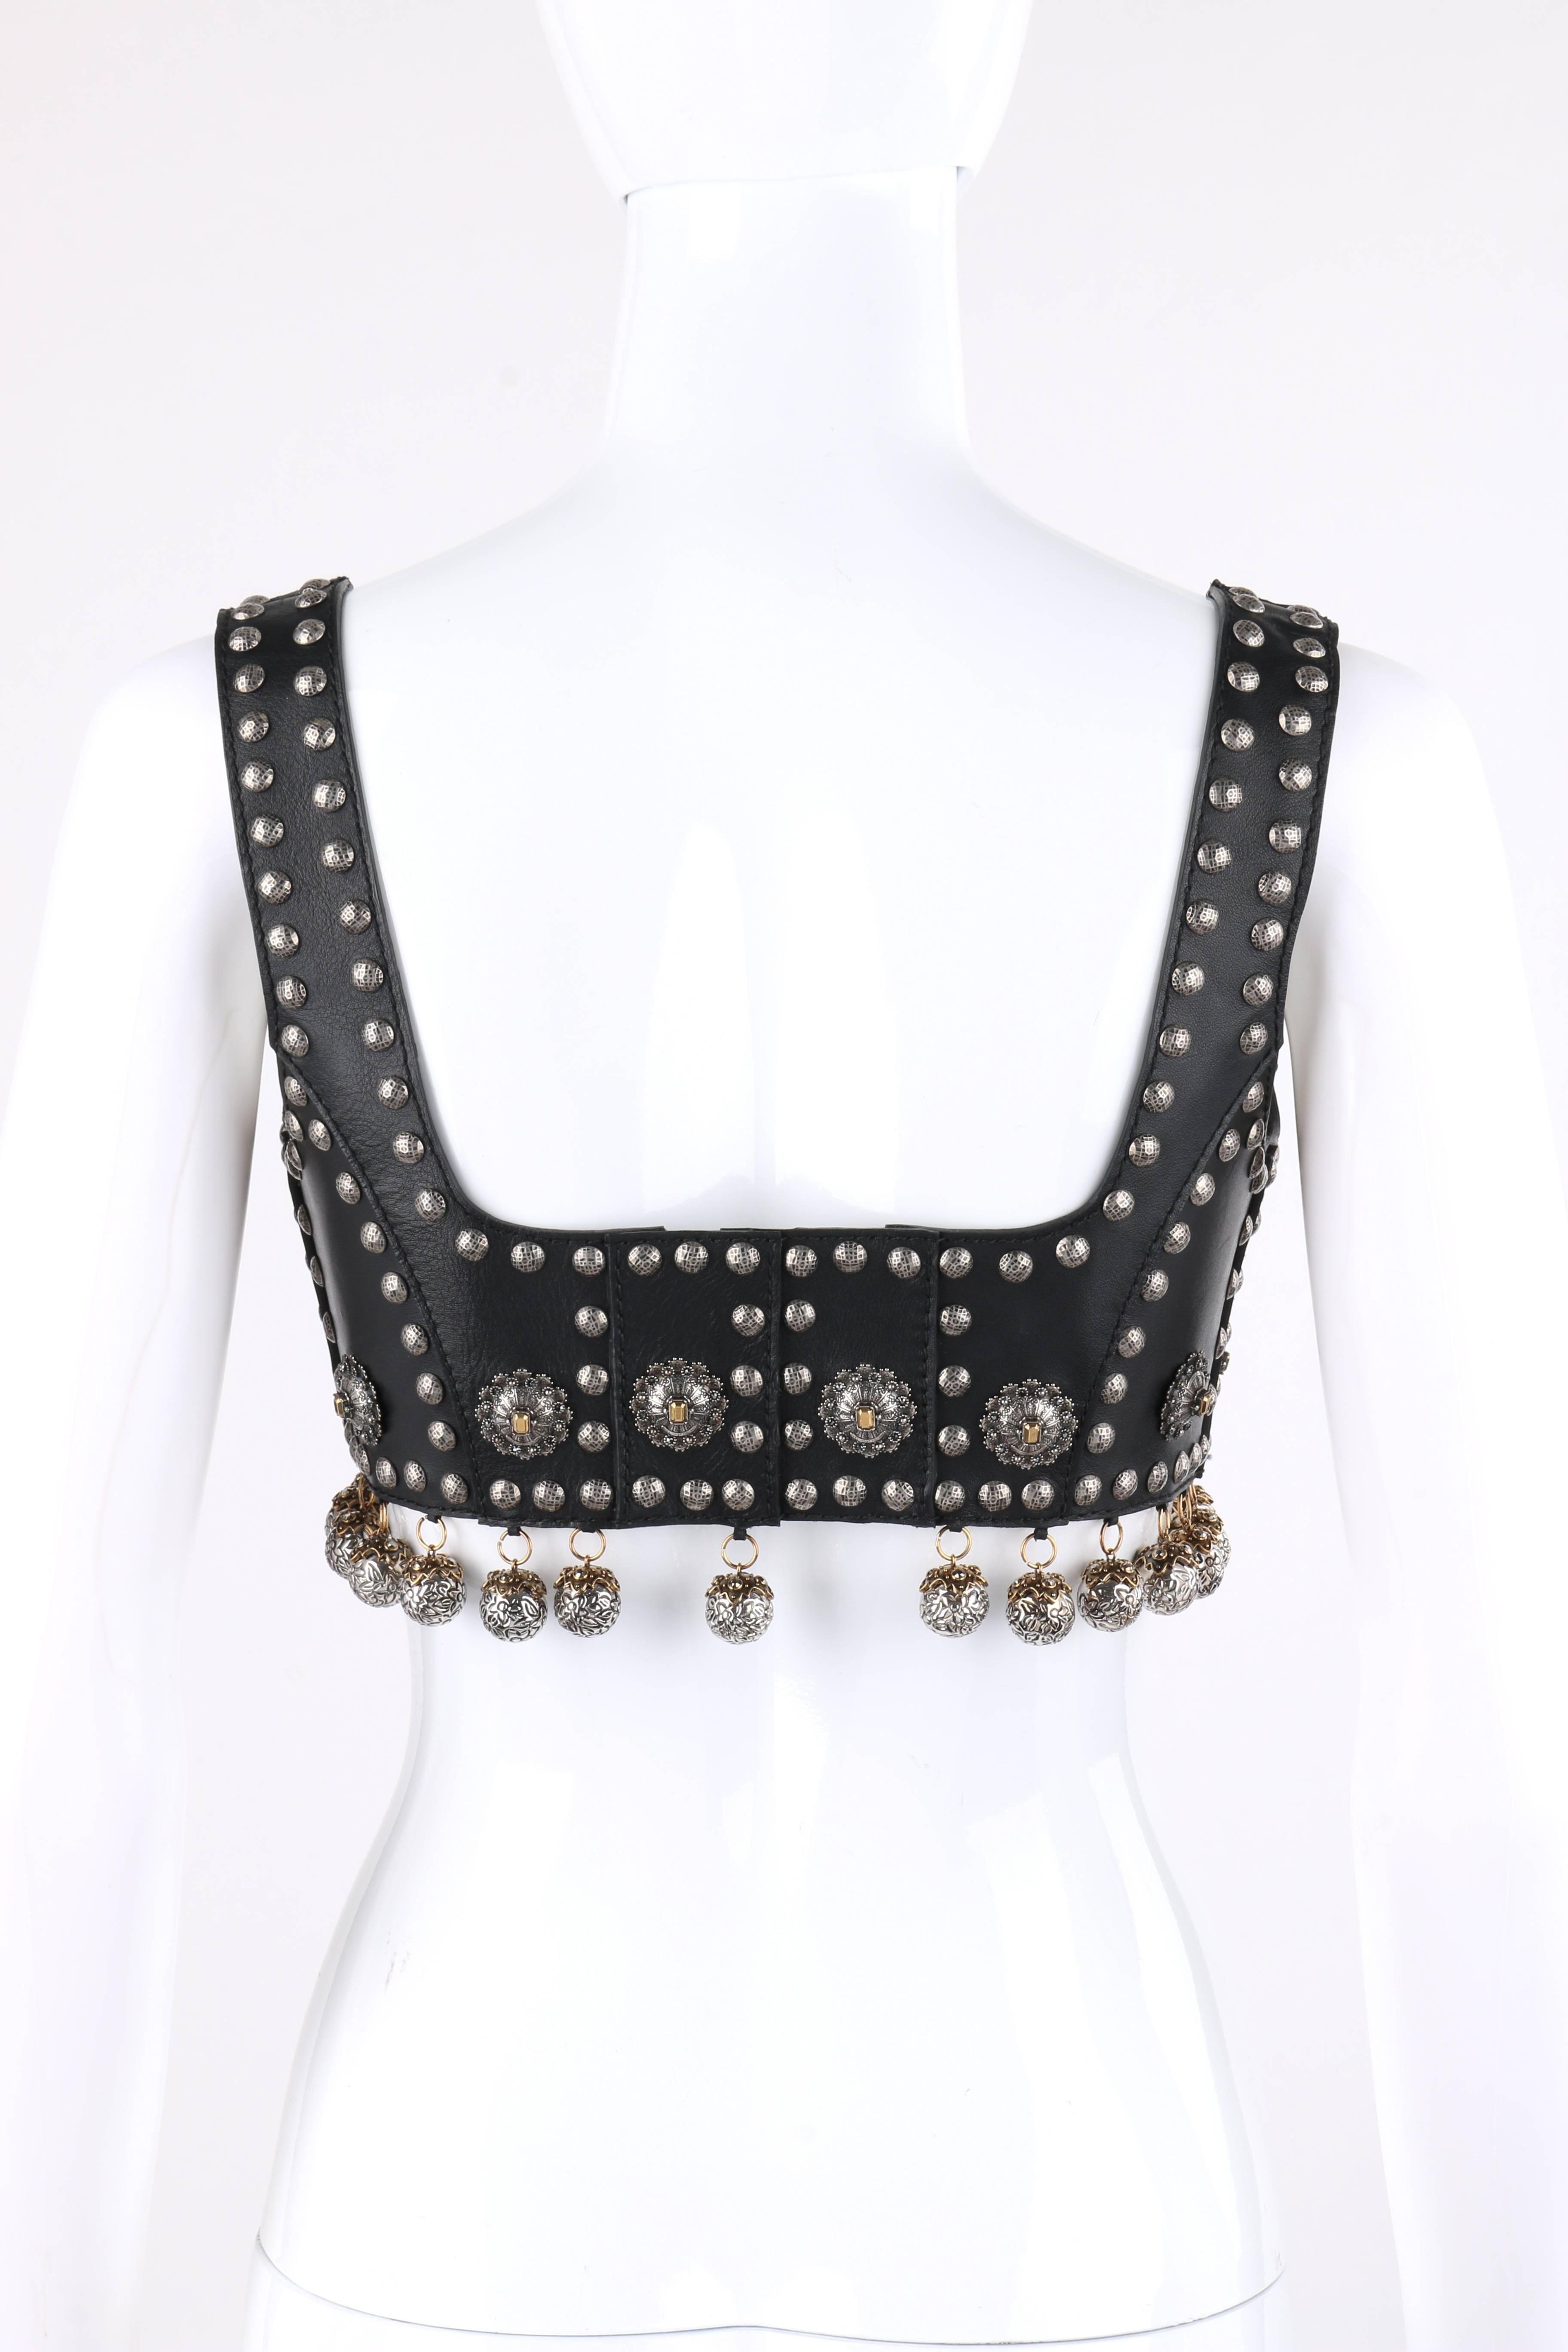 ALEXANDER McQUEEN S/S 2015 Black Nappa Leather Studded Lace Up Bra Top Bustier In New Condition In Thiensville, WI